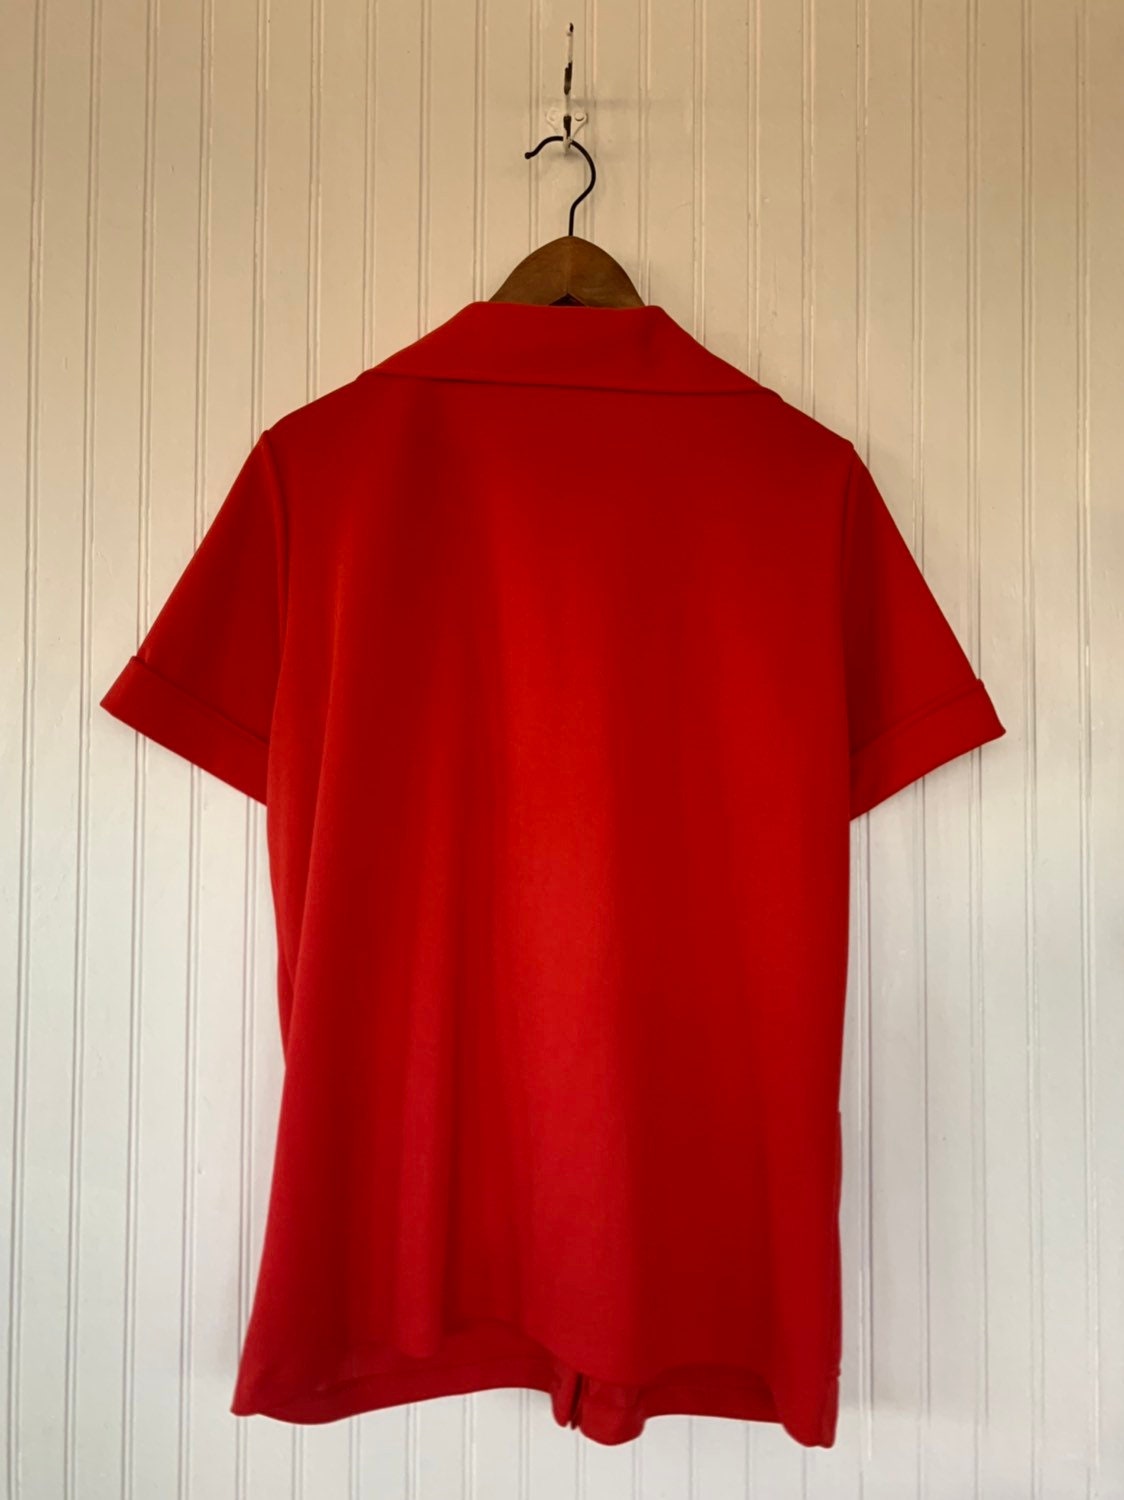 Vintage 80s XL Bright Red Short Sleeve Top Wide Collar Shirt Smock ...